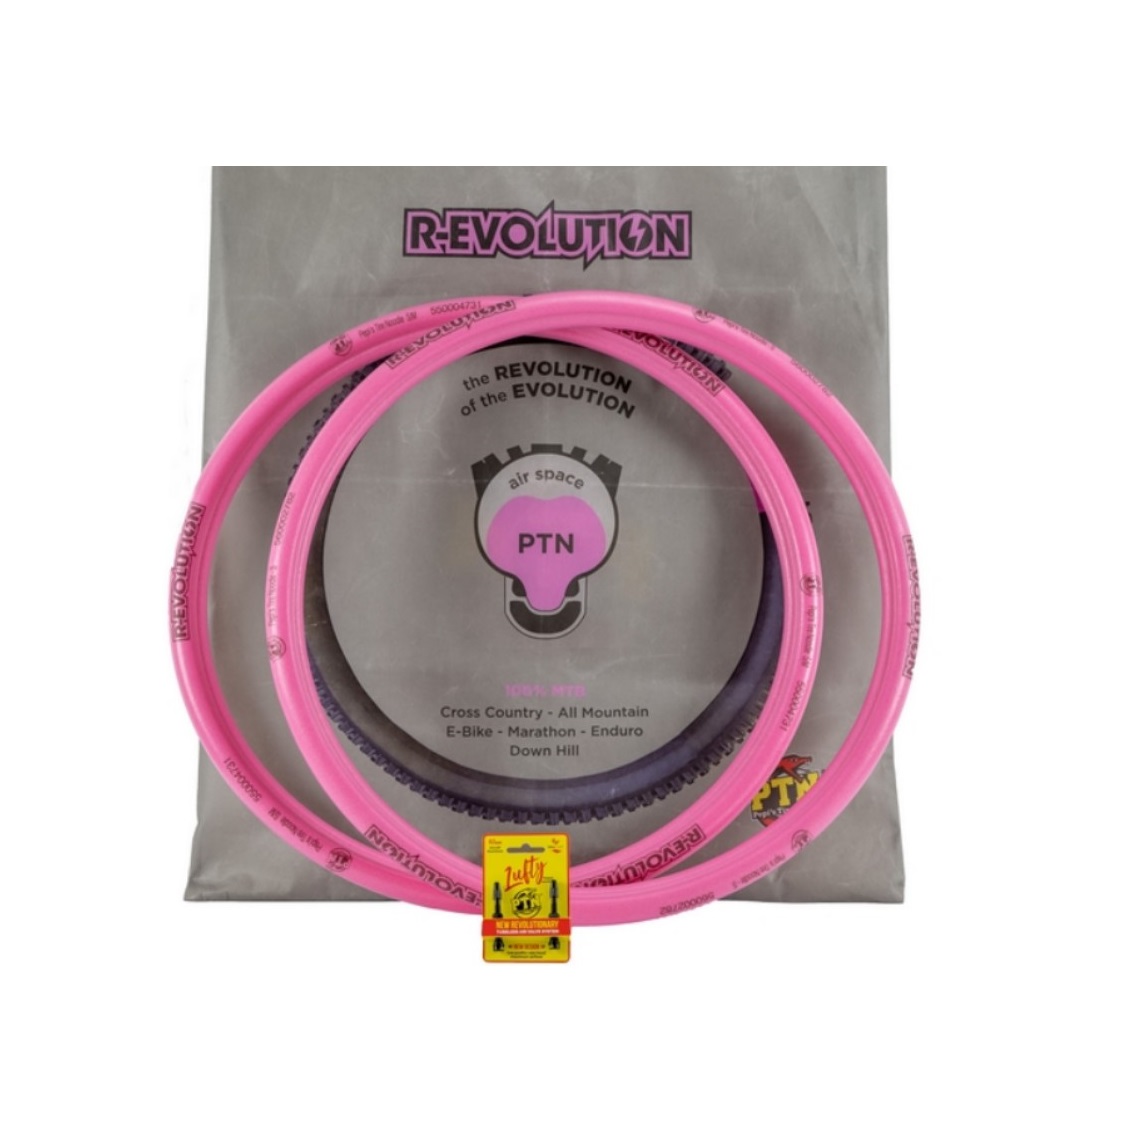 Tubeless kit R-Evolution puncture prevention 29 size M/L pink